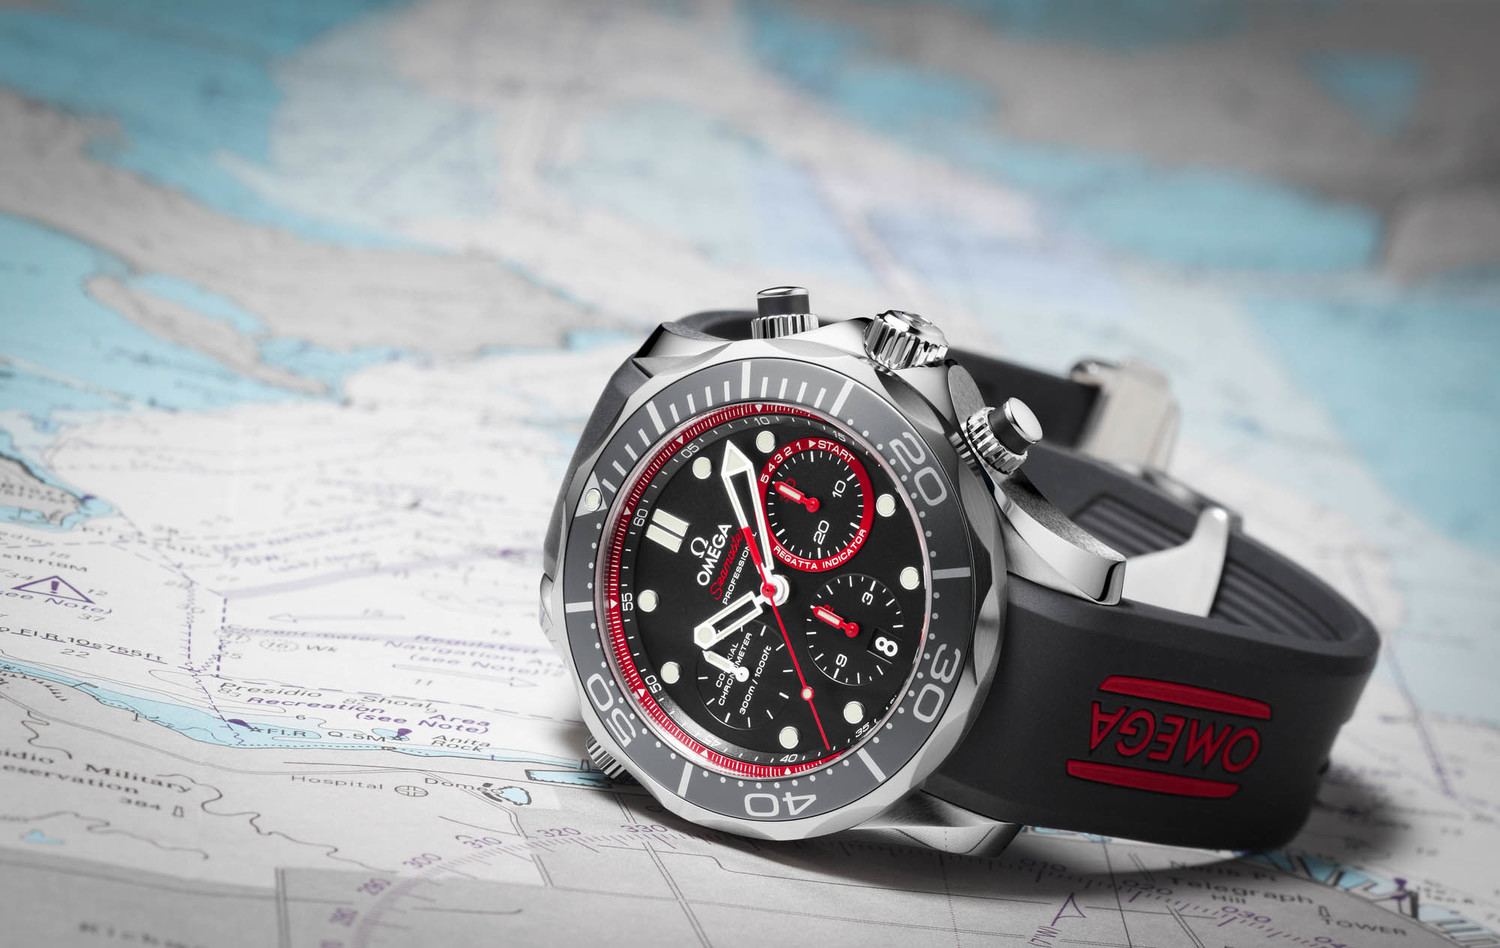 Introducing The Omega Seamaster Diver 